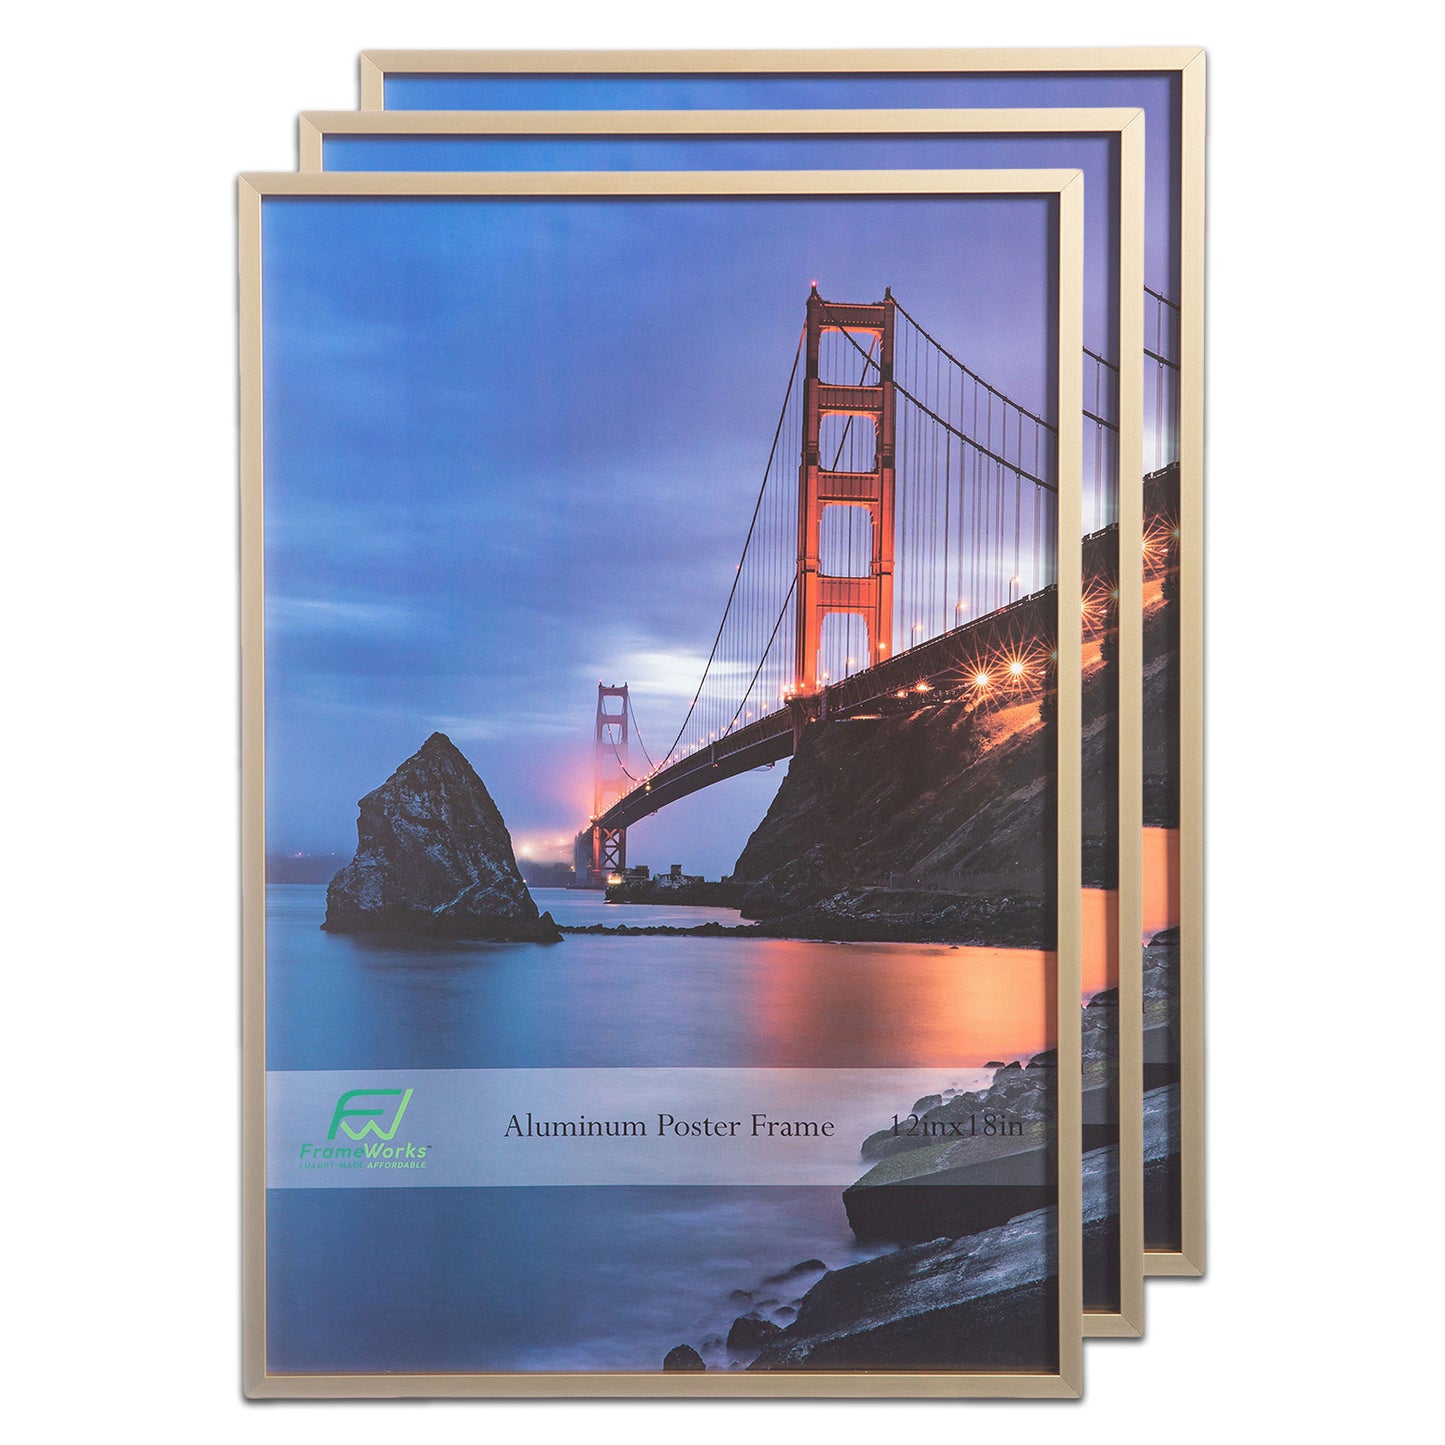 12" x 18" Gold Brushed Aluminum Poster Picture Frame with Plexiglass